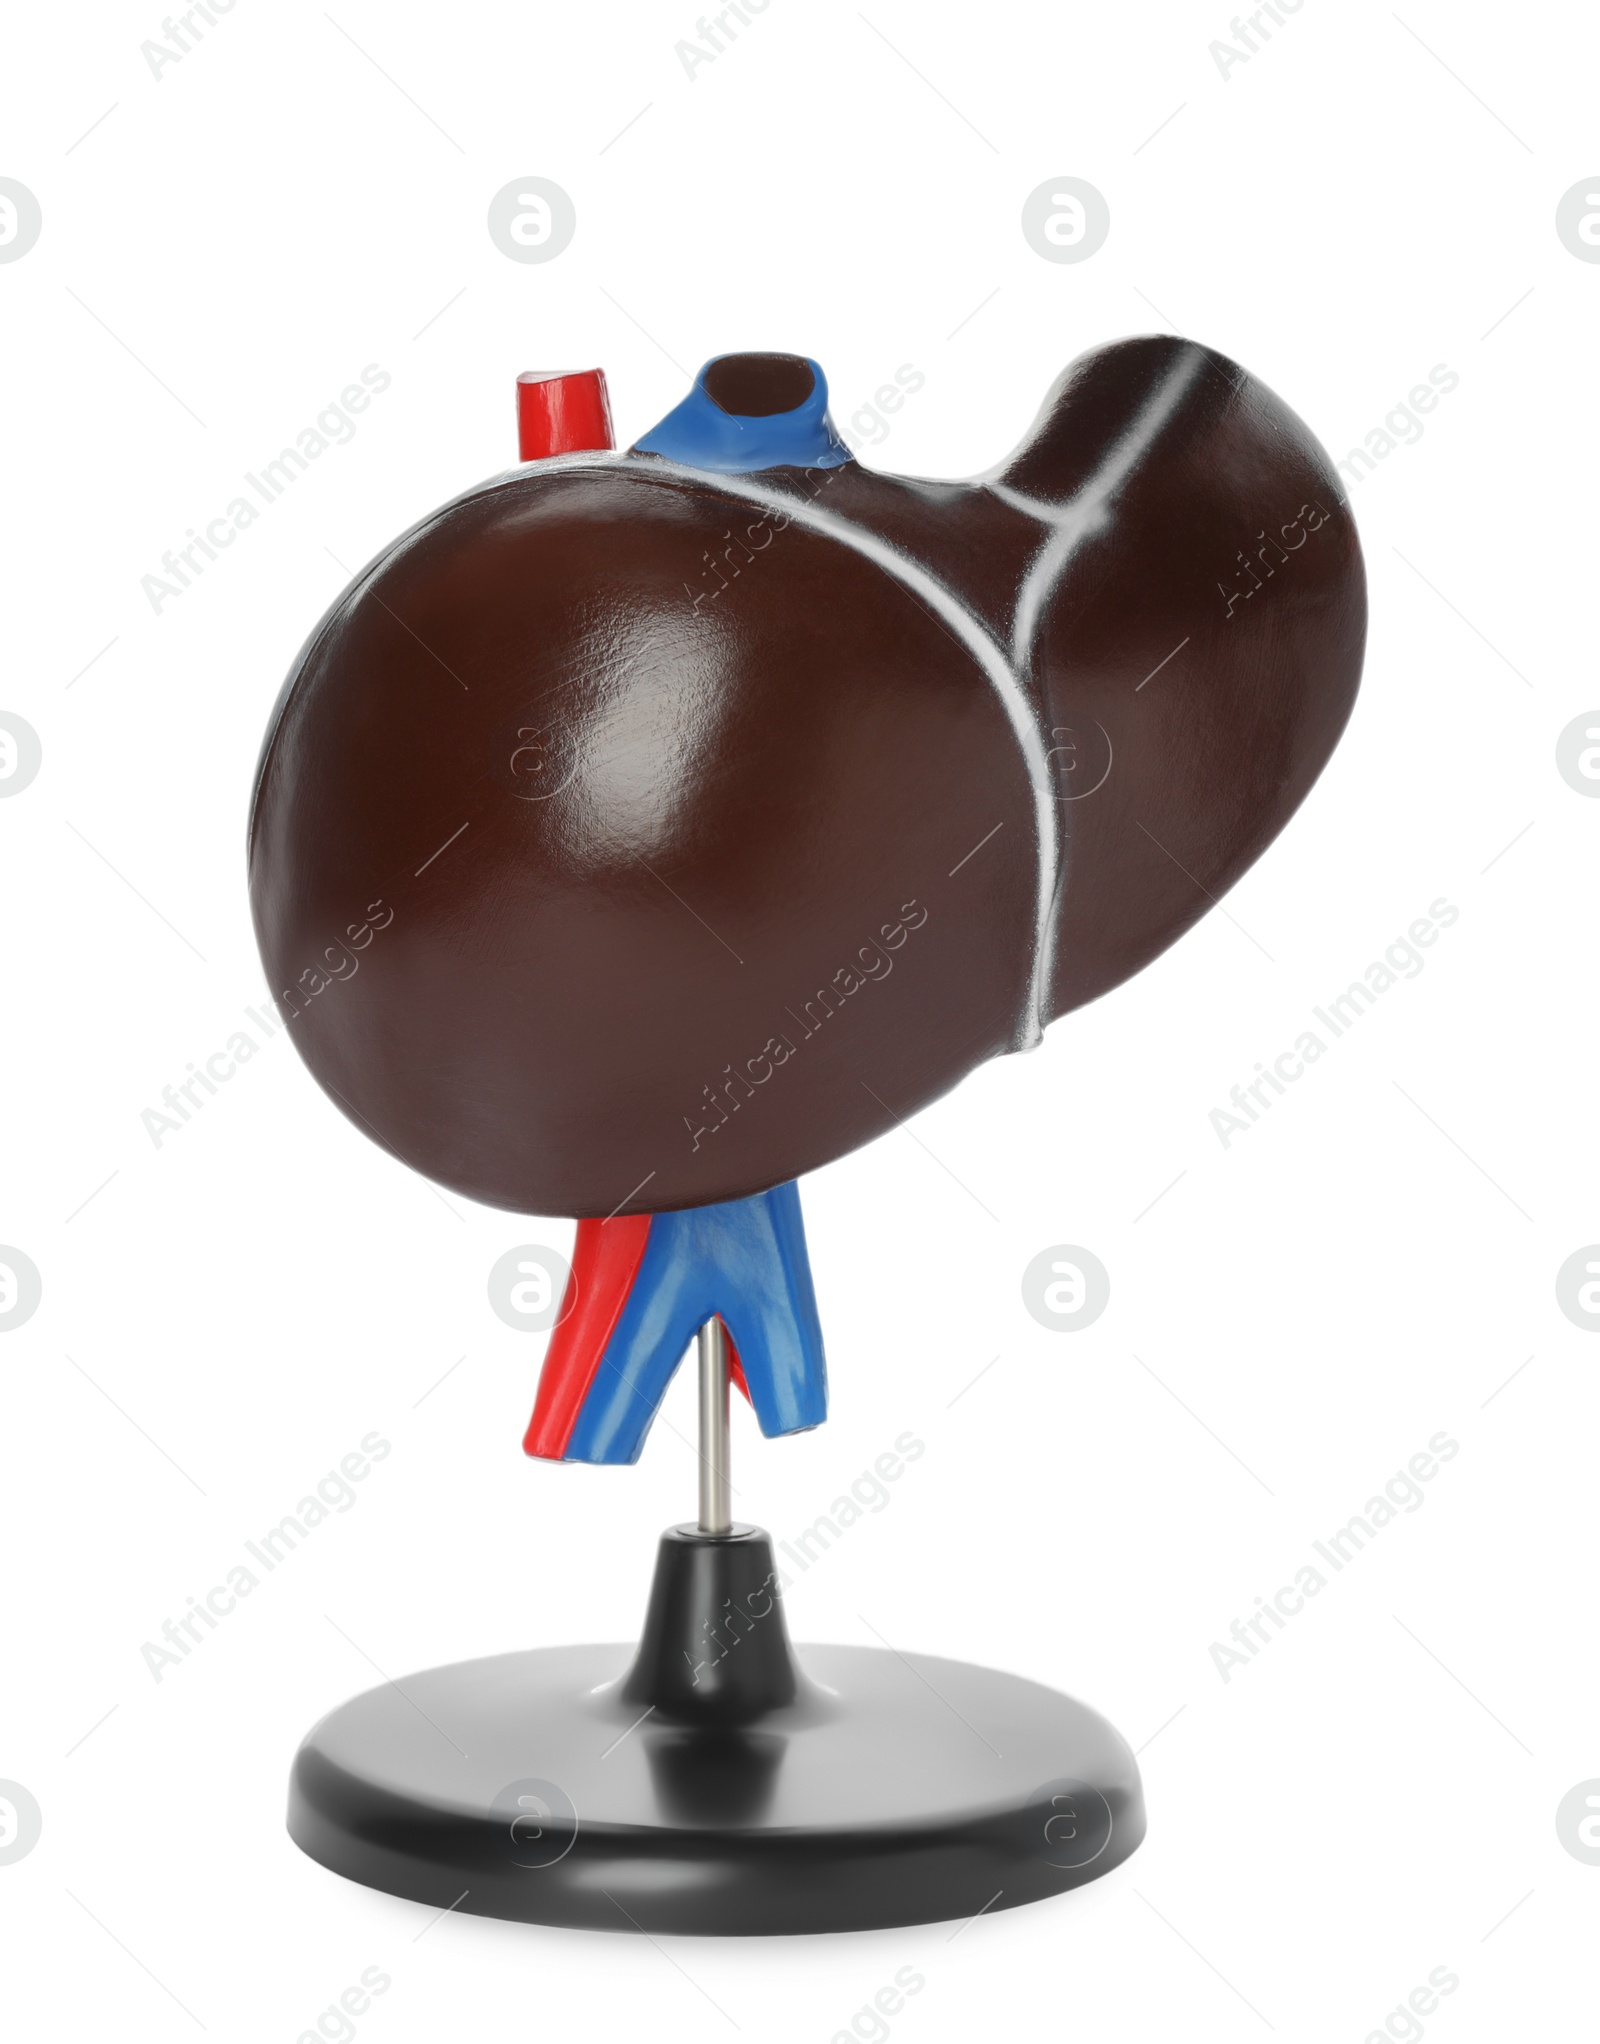 Photo of Plastic model of liver on white background